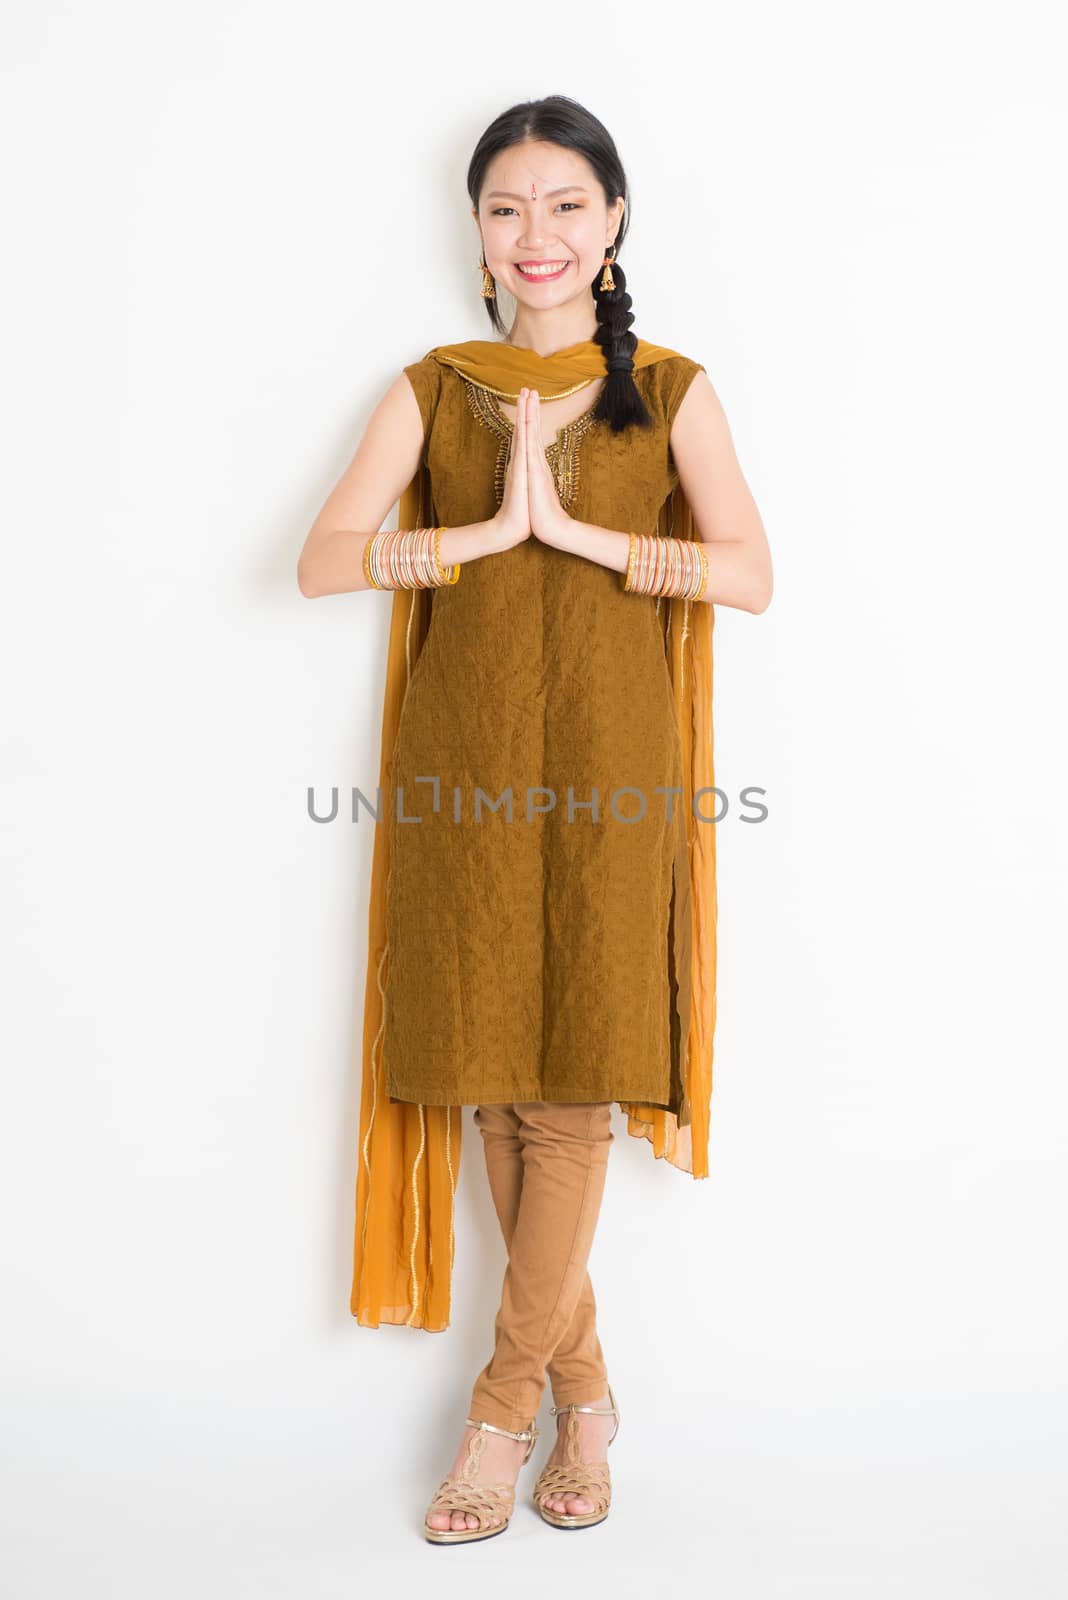 Portrait of mixed race Indian Chinese woman in traditional punjabi dress greeting, full length standing on plain white background.